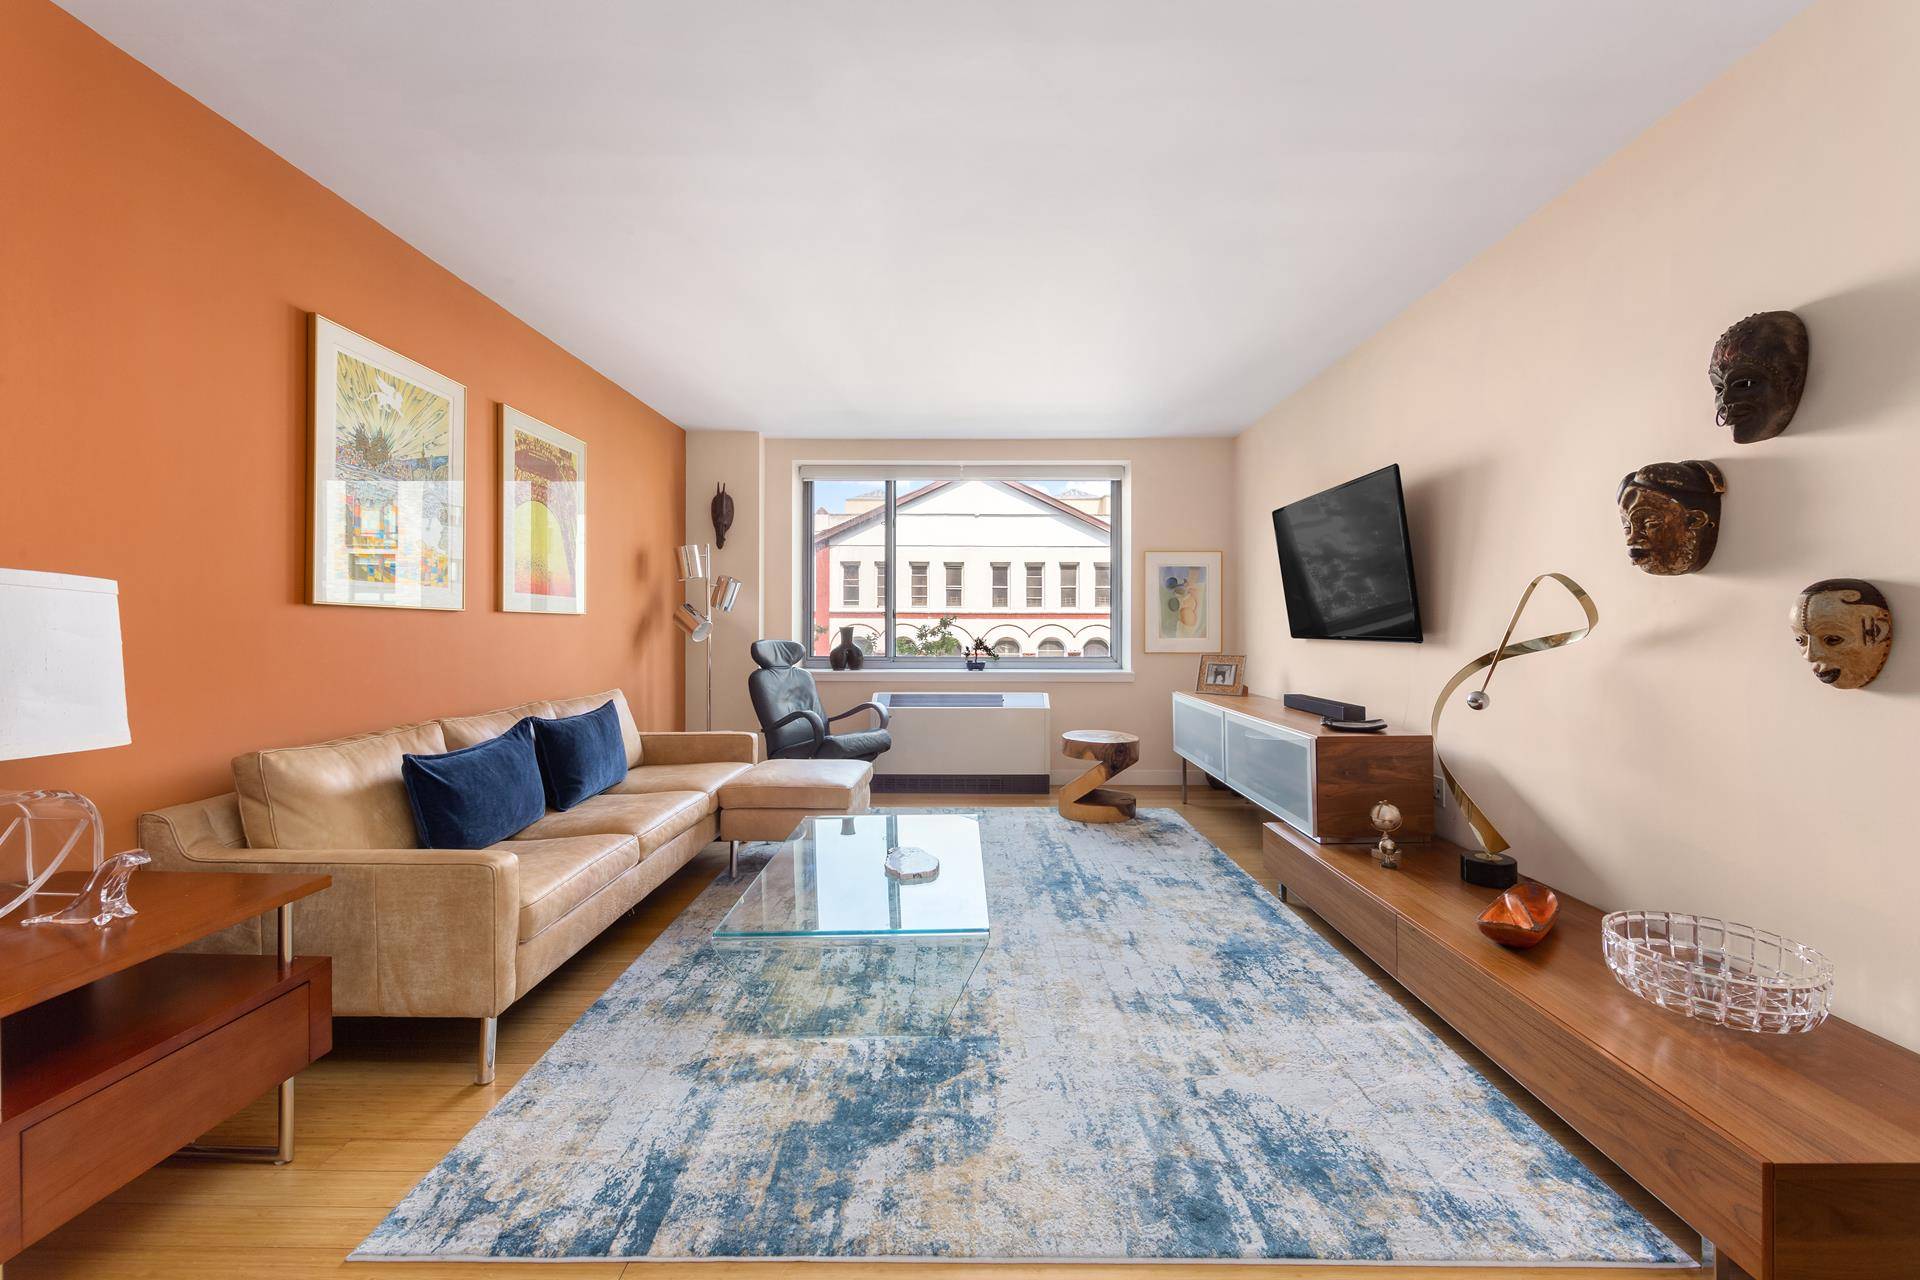 Welcome to apartment A506 at the Kalahari, a premiere luxury condominium in Central Harlem.